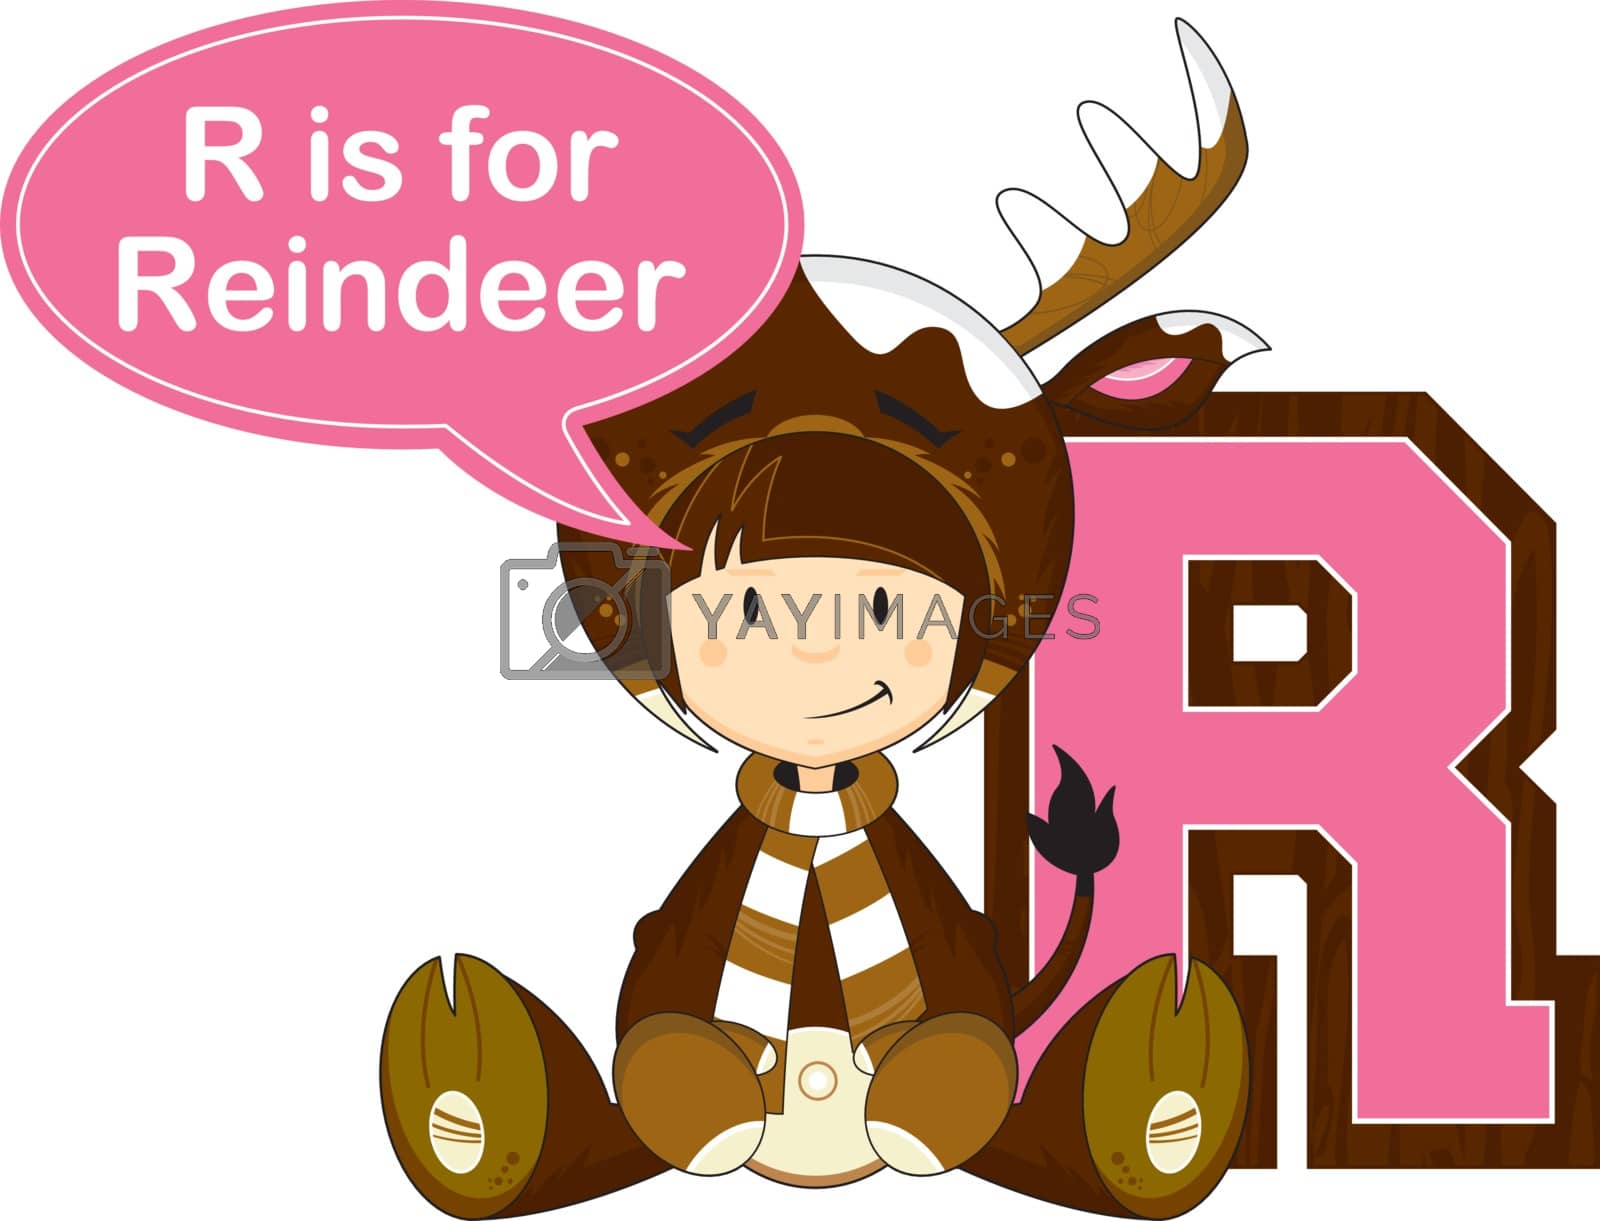 Royalty free image of R is for Reindeer Girl by markmurphycreative